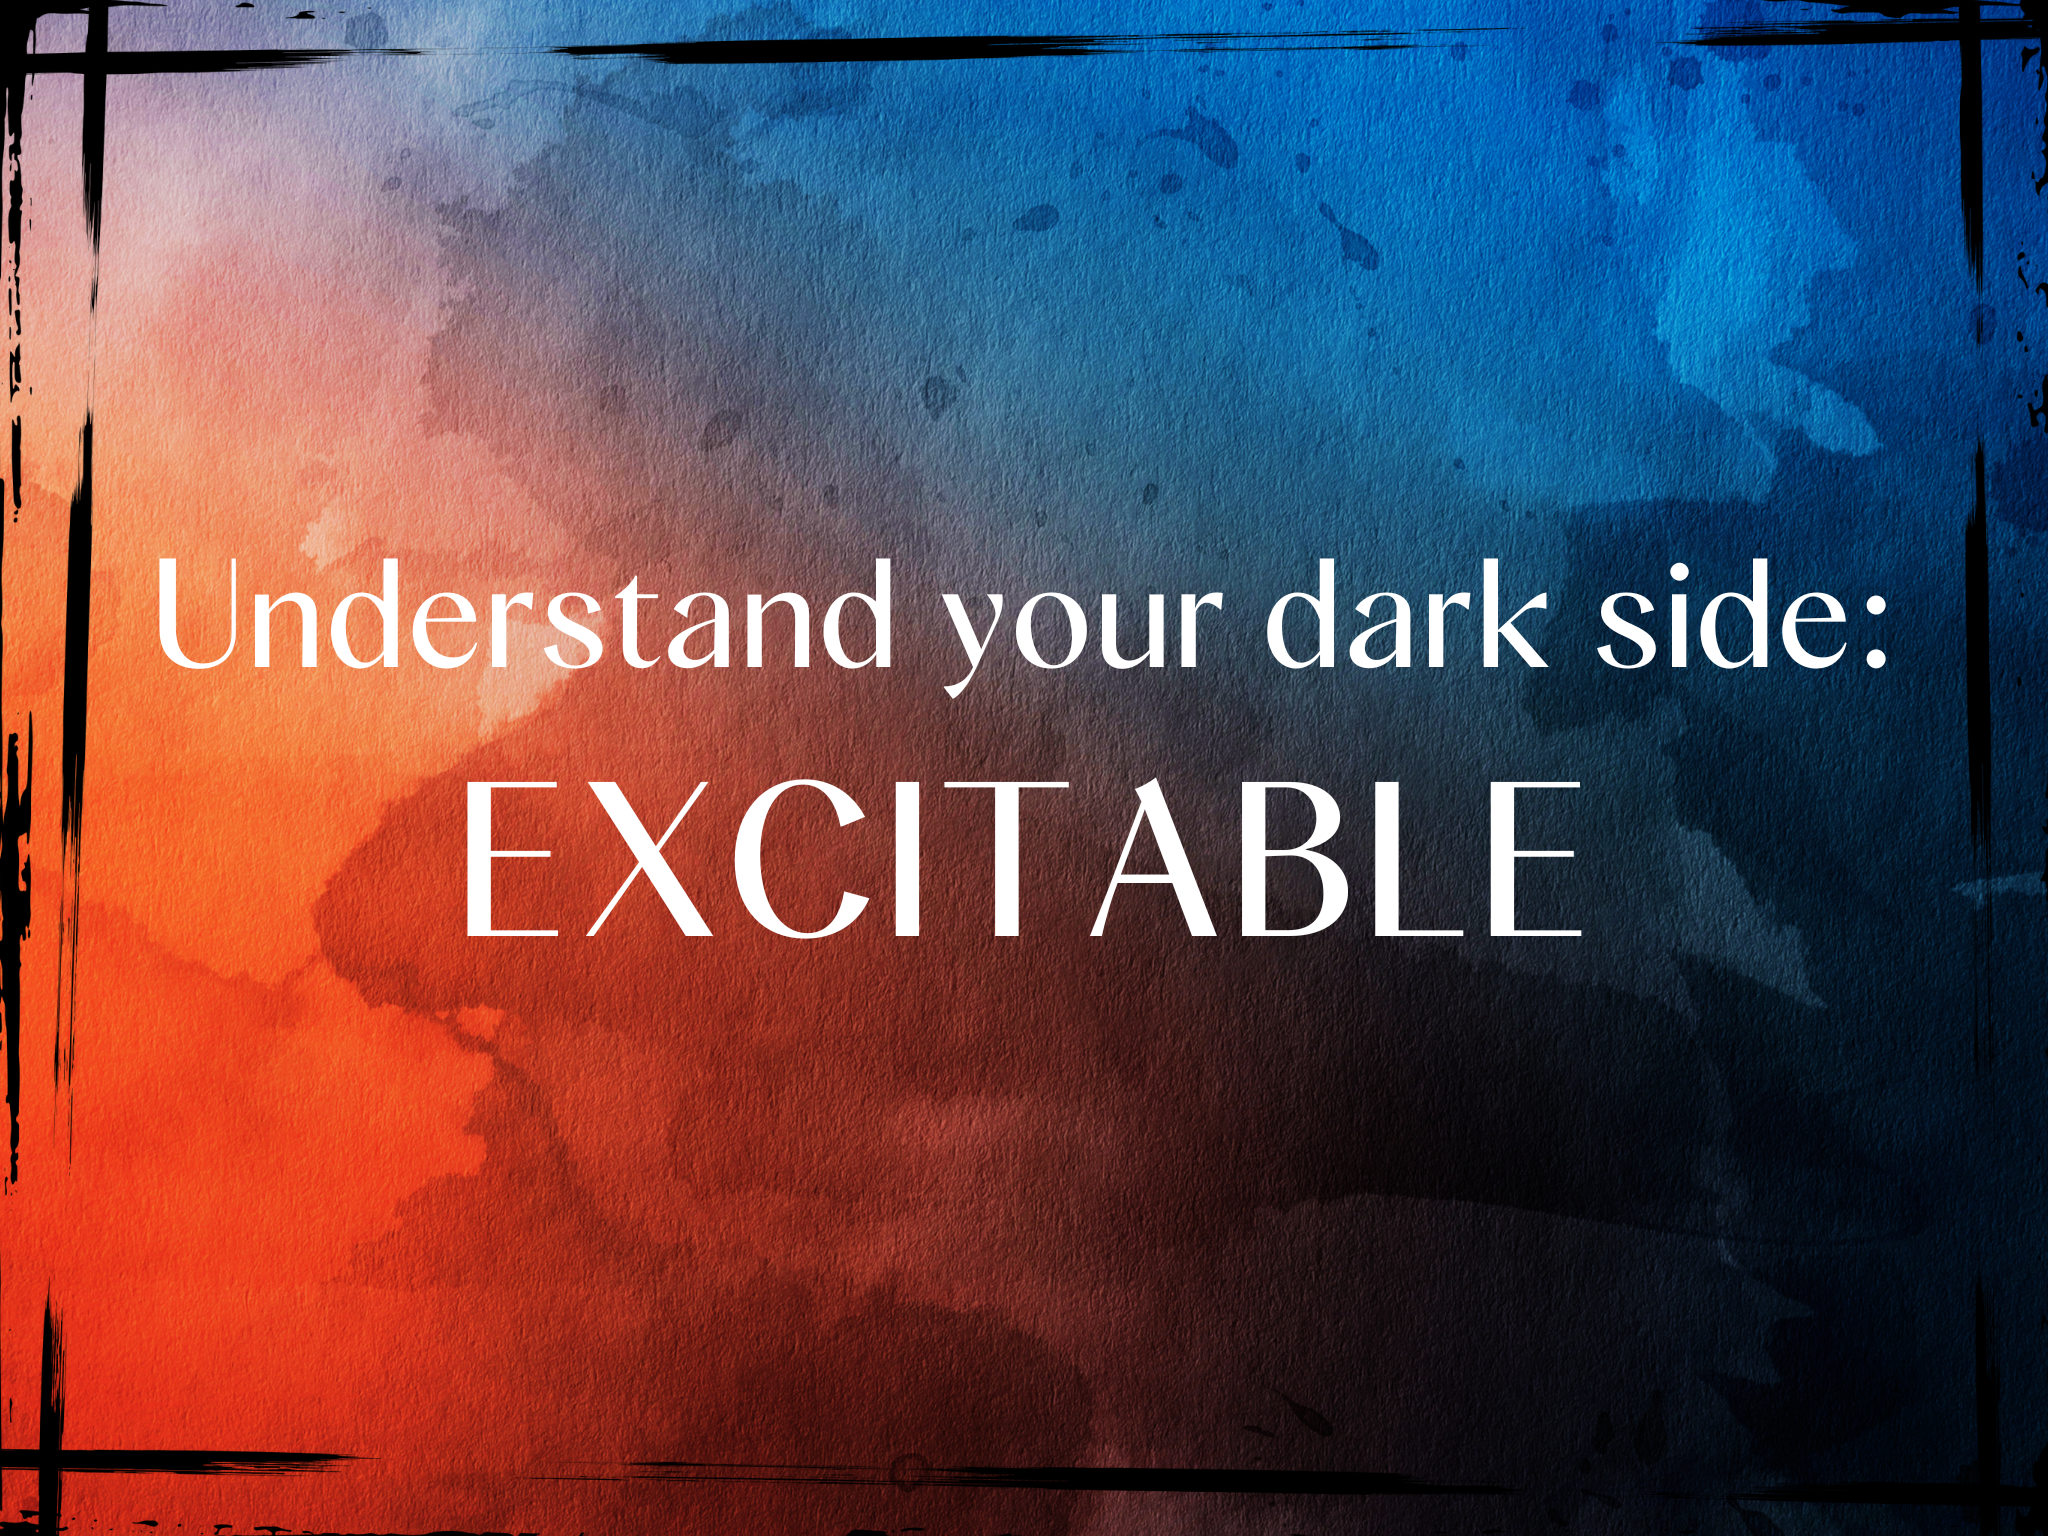 Do you know your dark side - Excitable